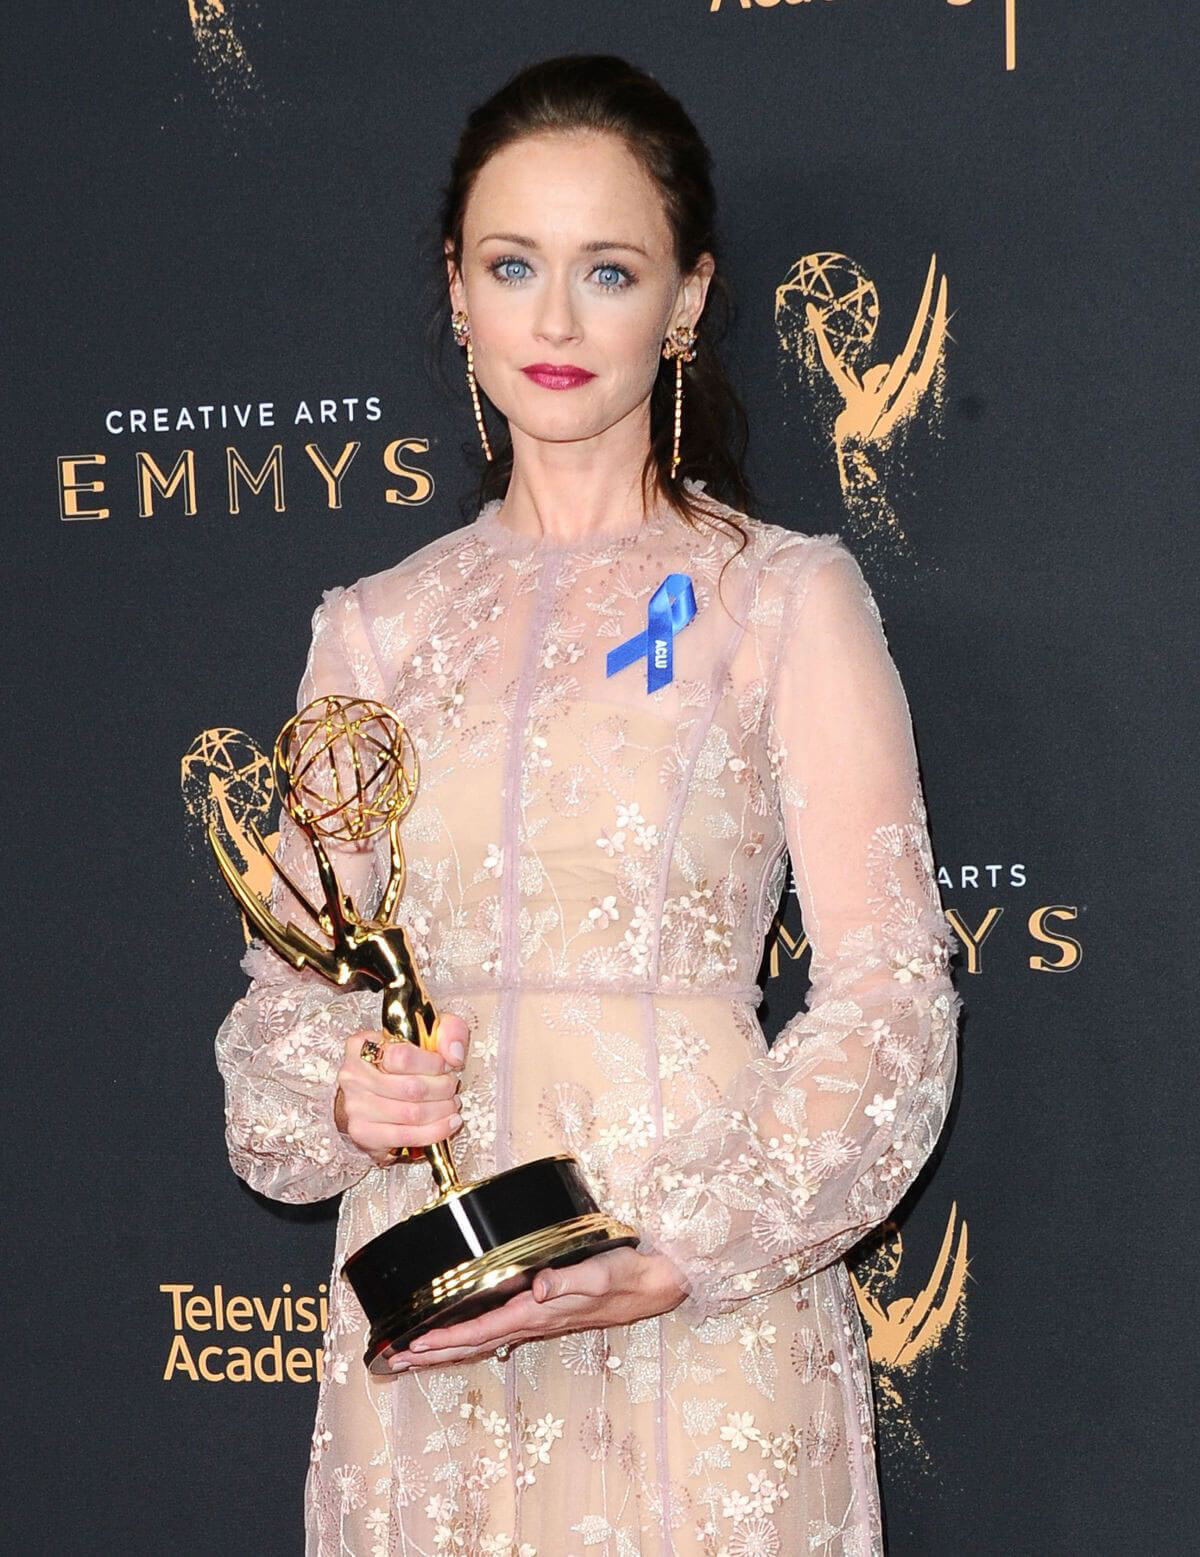 Alexis Bledel at Creative Arts Emmy Awards in Los Angeles